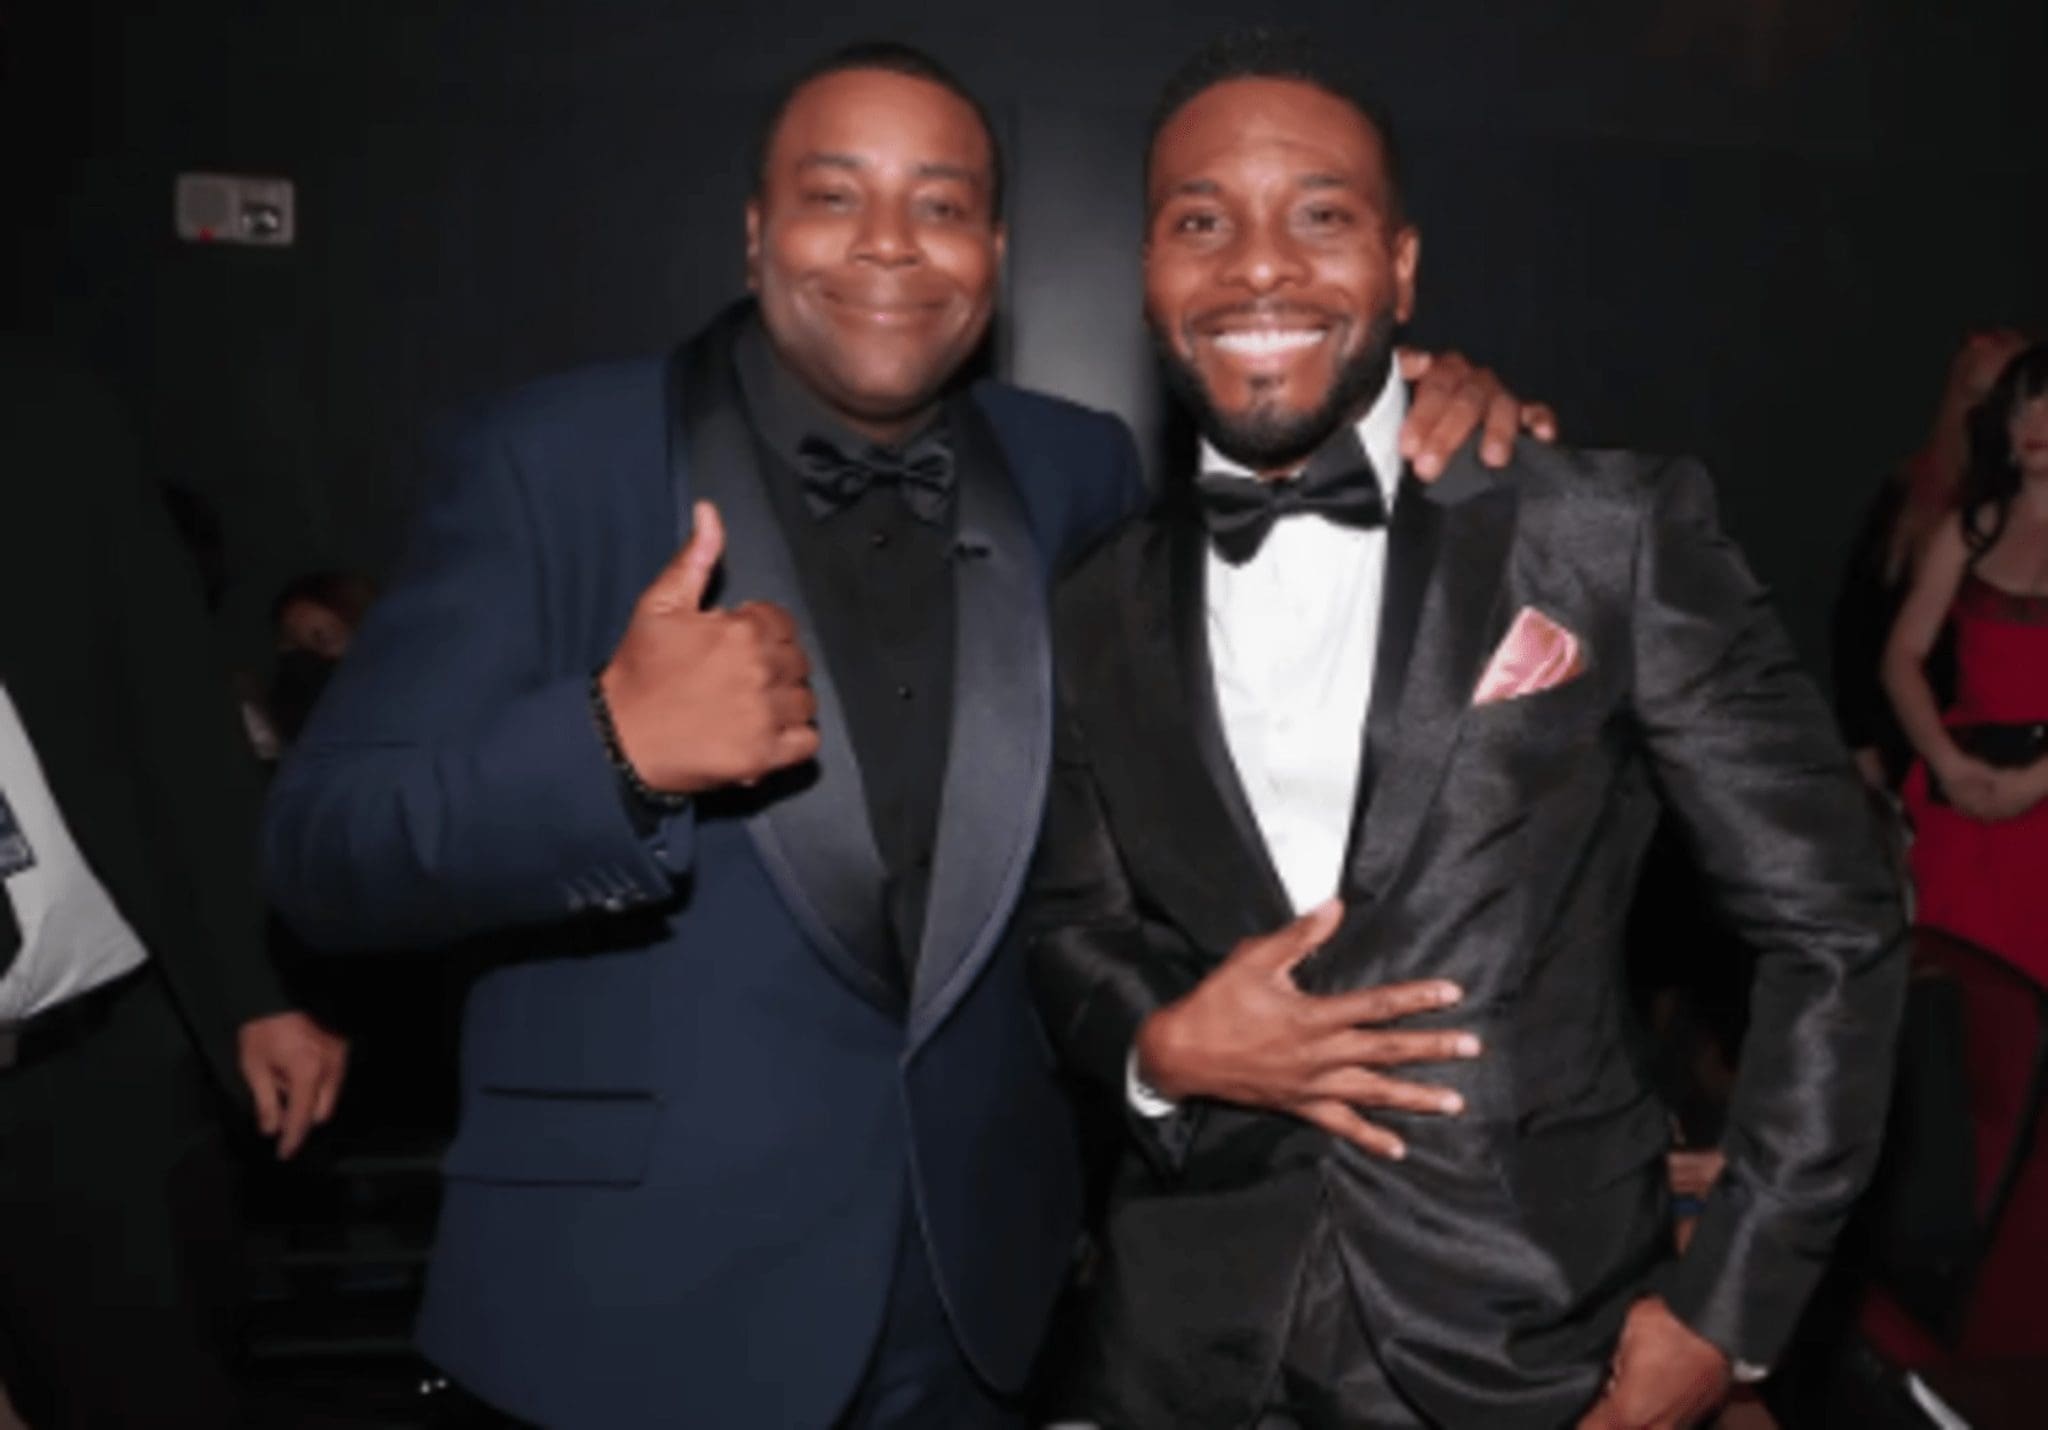 On the 2022 Emmys red carpet, Kenan Thompson and Kel Mitchell were back together again.